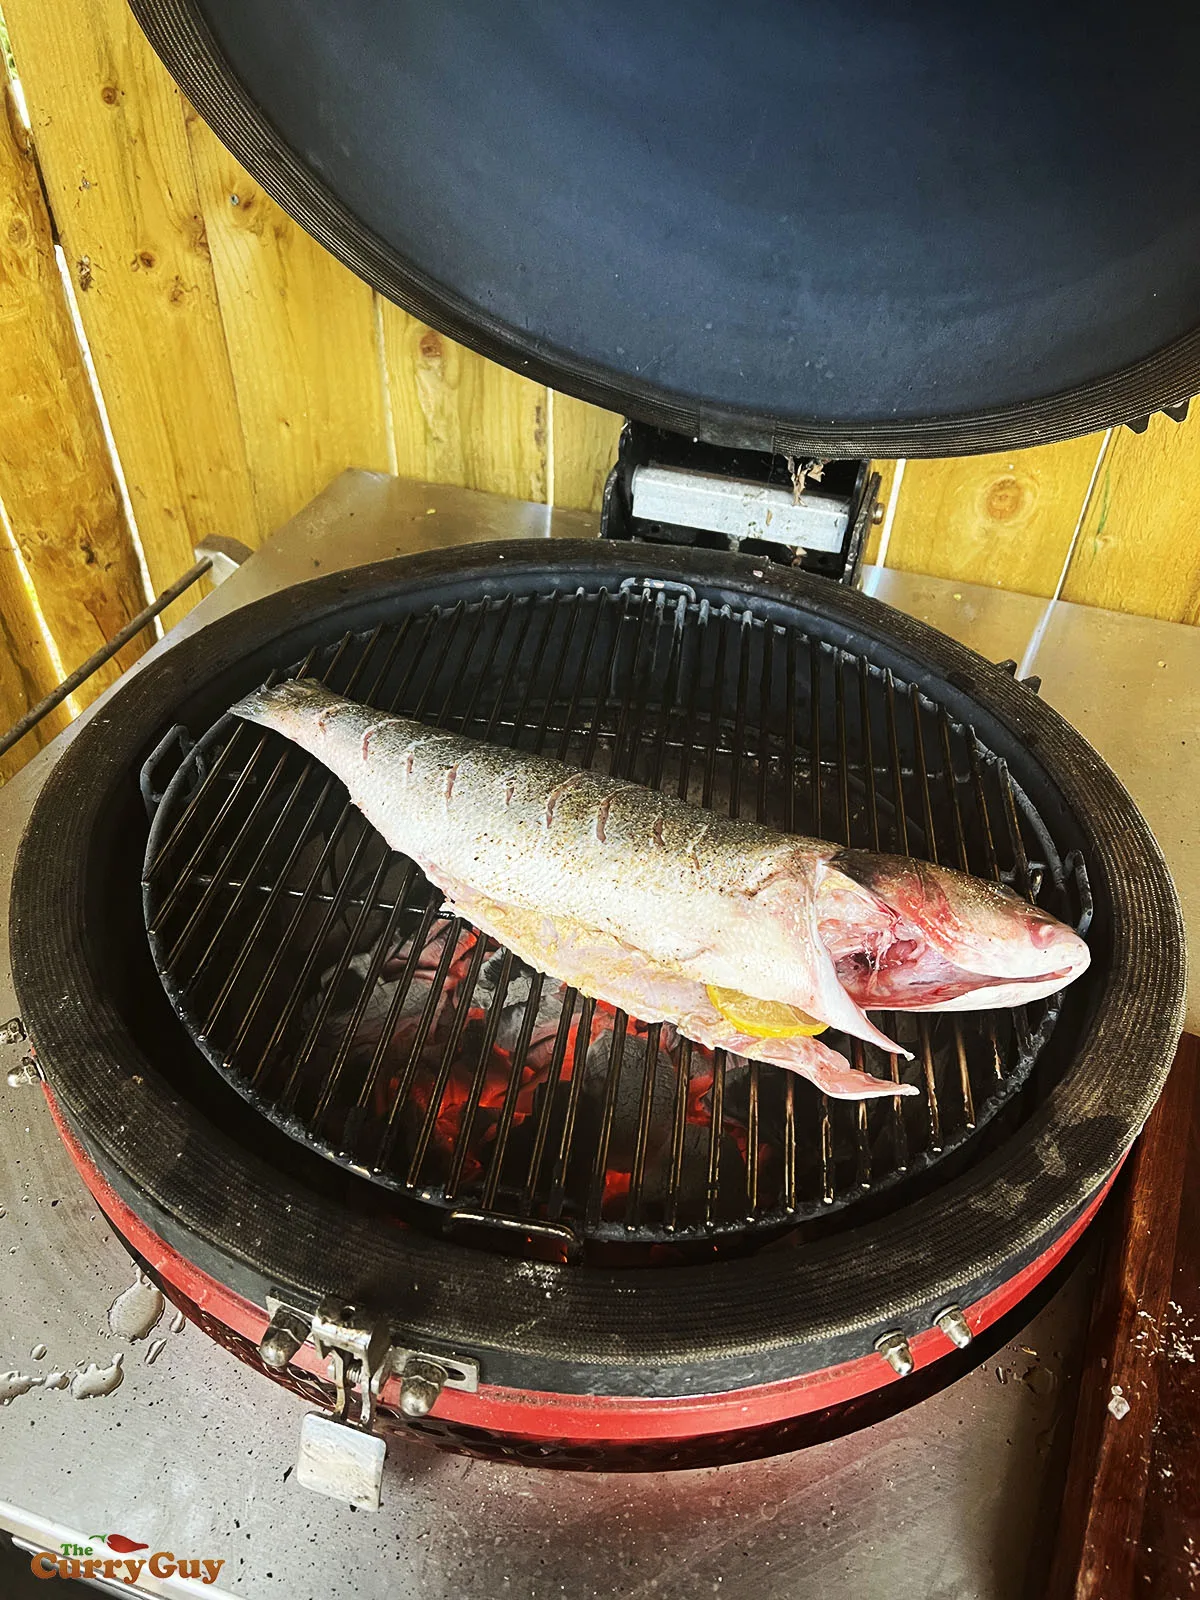 Placing the fish on the grill